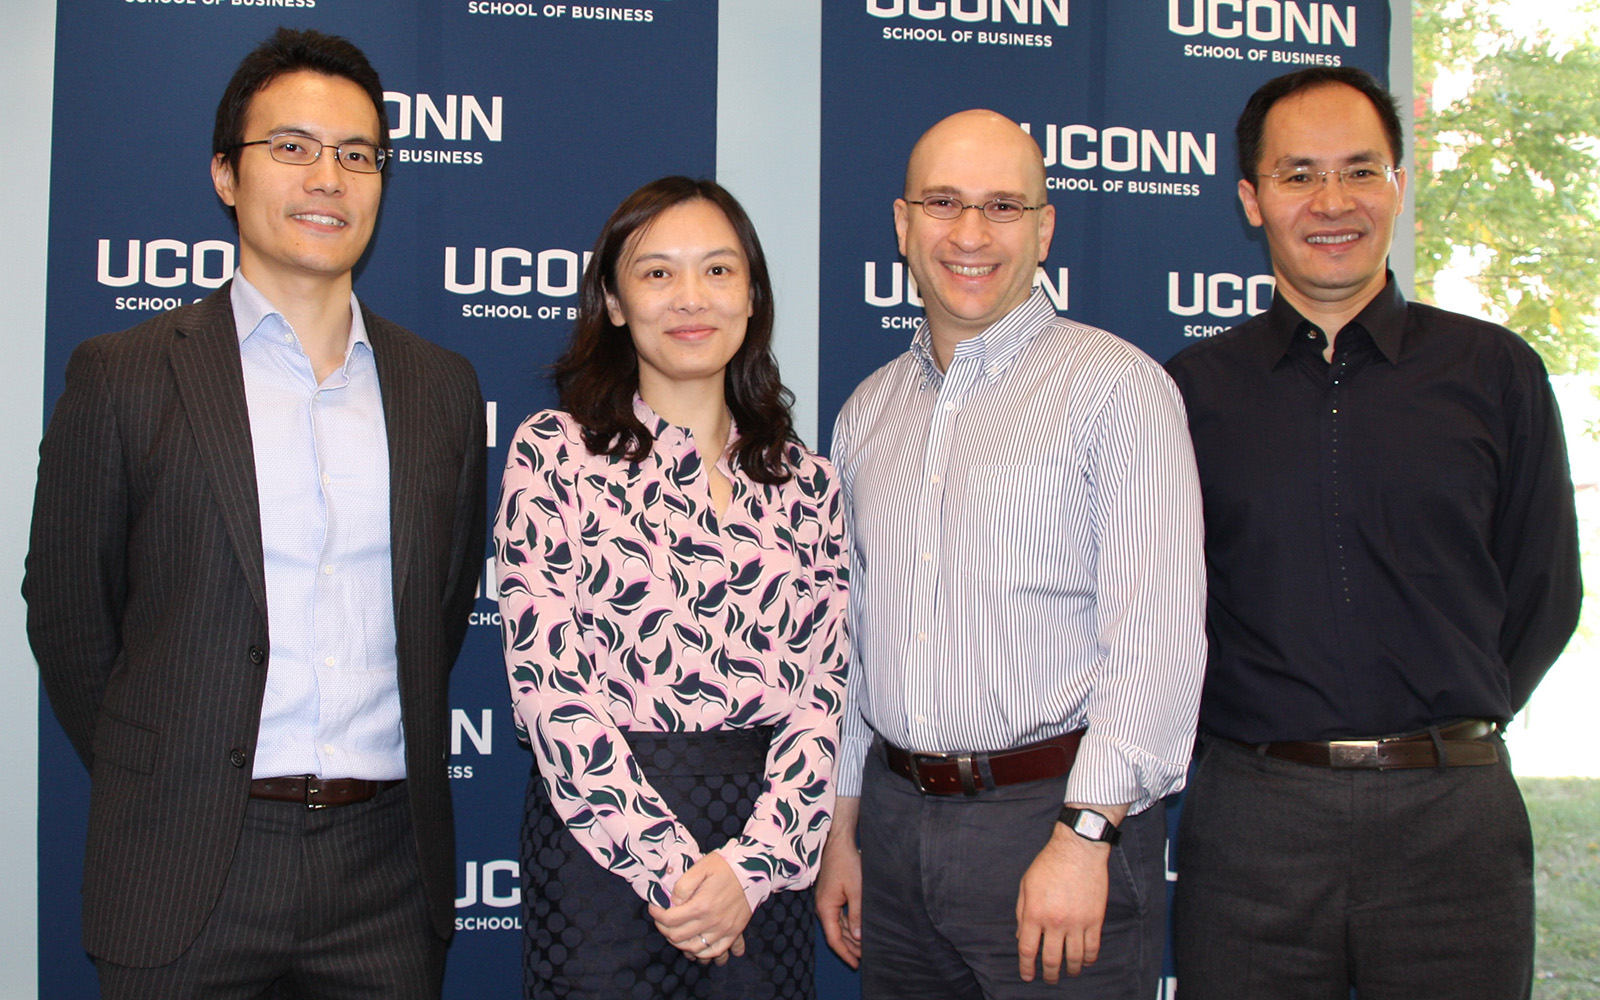 From left: Shijie Lu, Ying Xie, Yakov Bart, and Xueming Luo. (Nancy White/UConn School of Business)